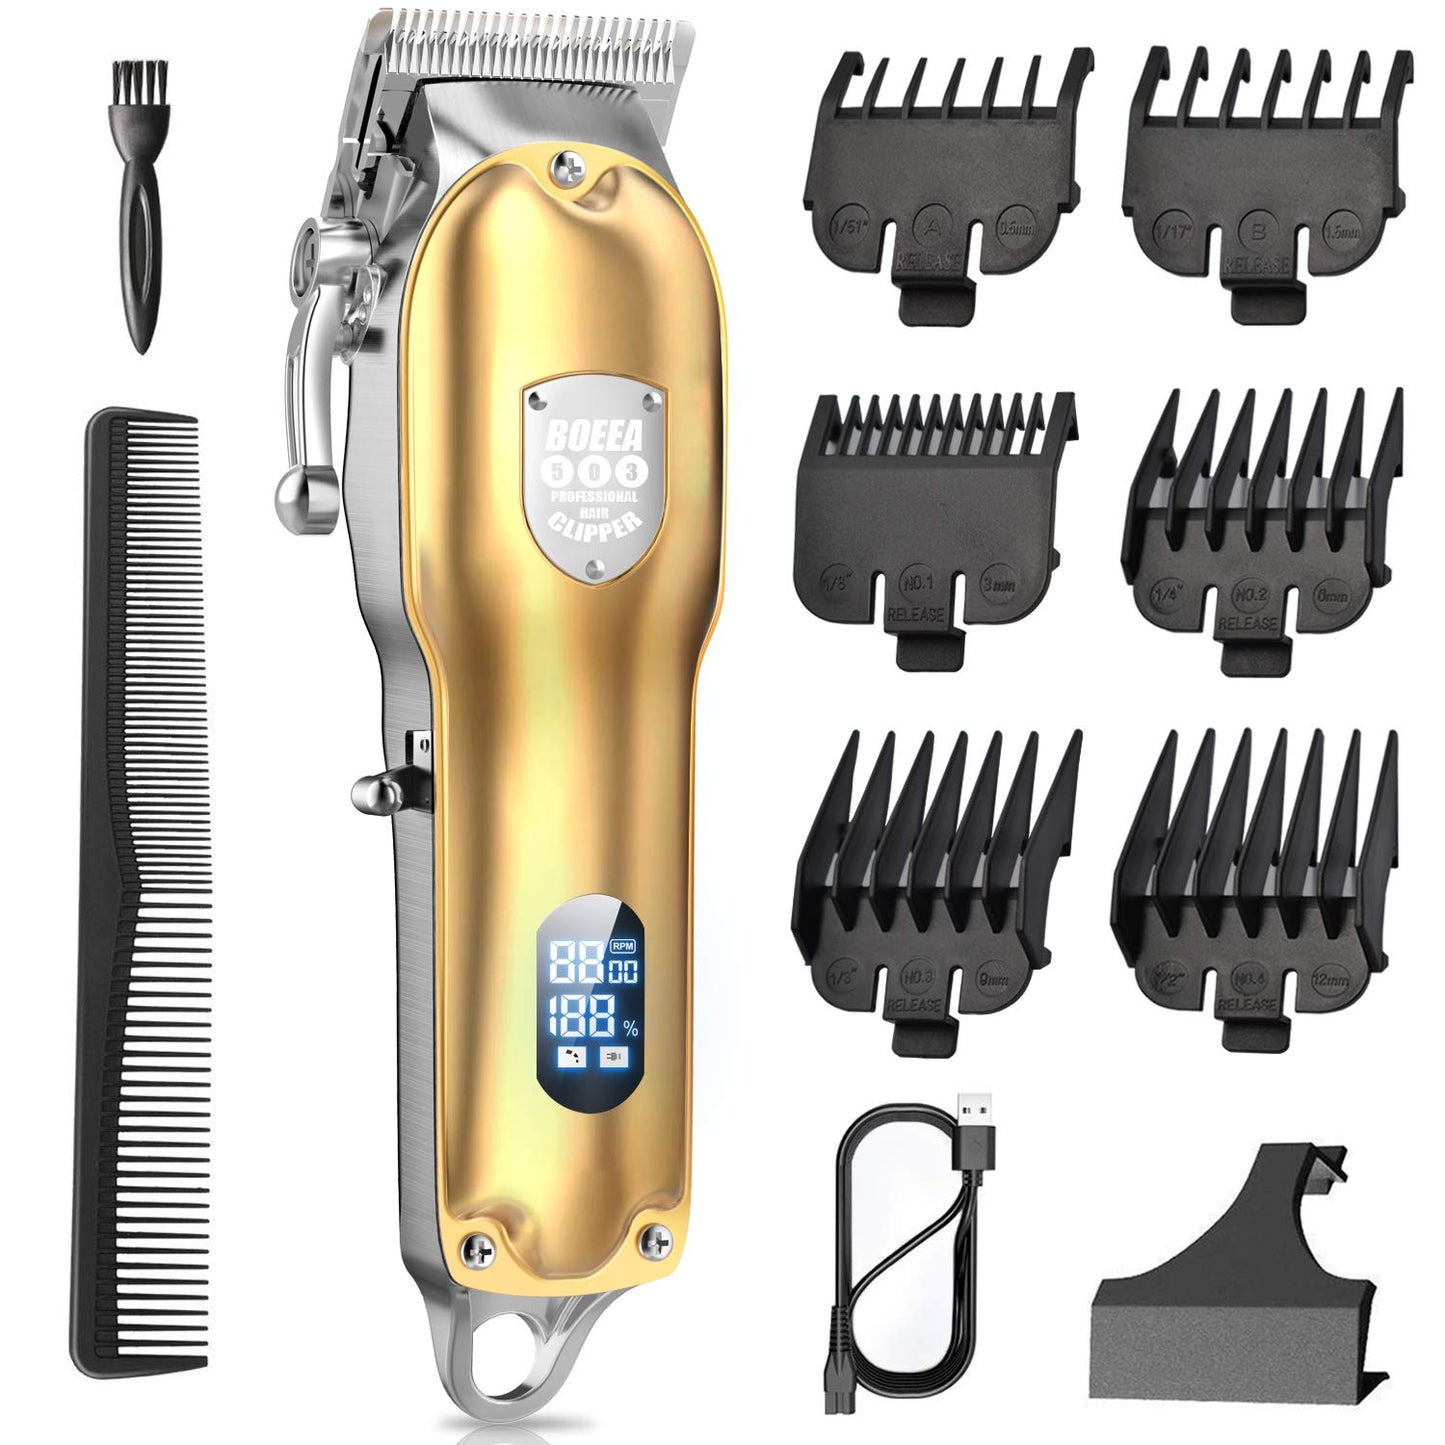 BOEEA Hair Clippers for Men Professional Cordless Clippers for Hair Cutting,Rechargeable Electric Haircut Kit for Home and Barbers, LED Display,Gold - Home Decor Gifts and More